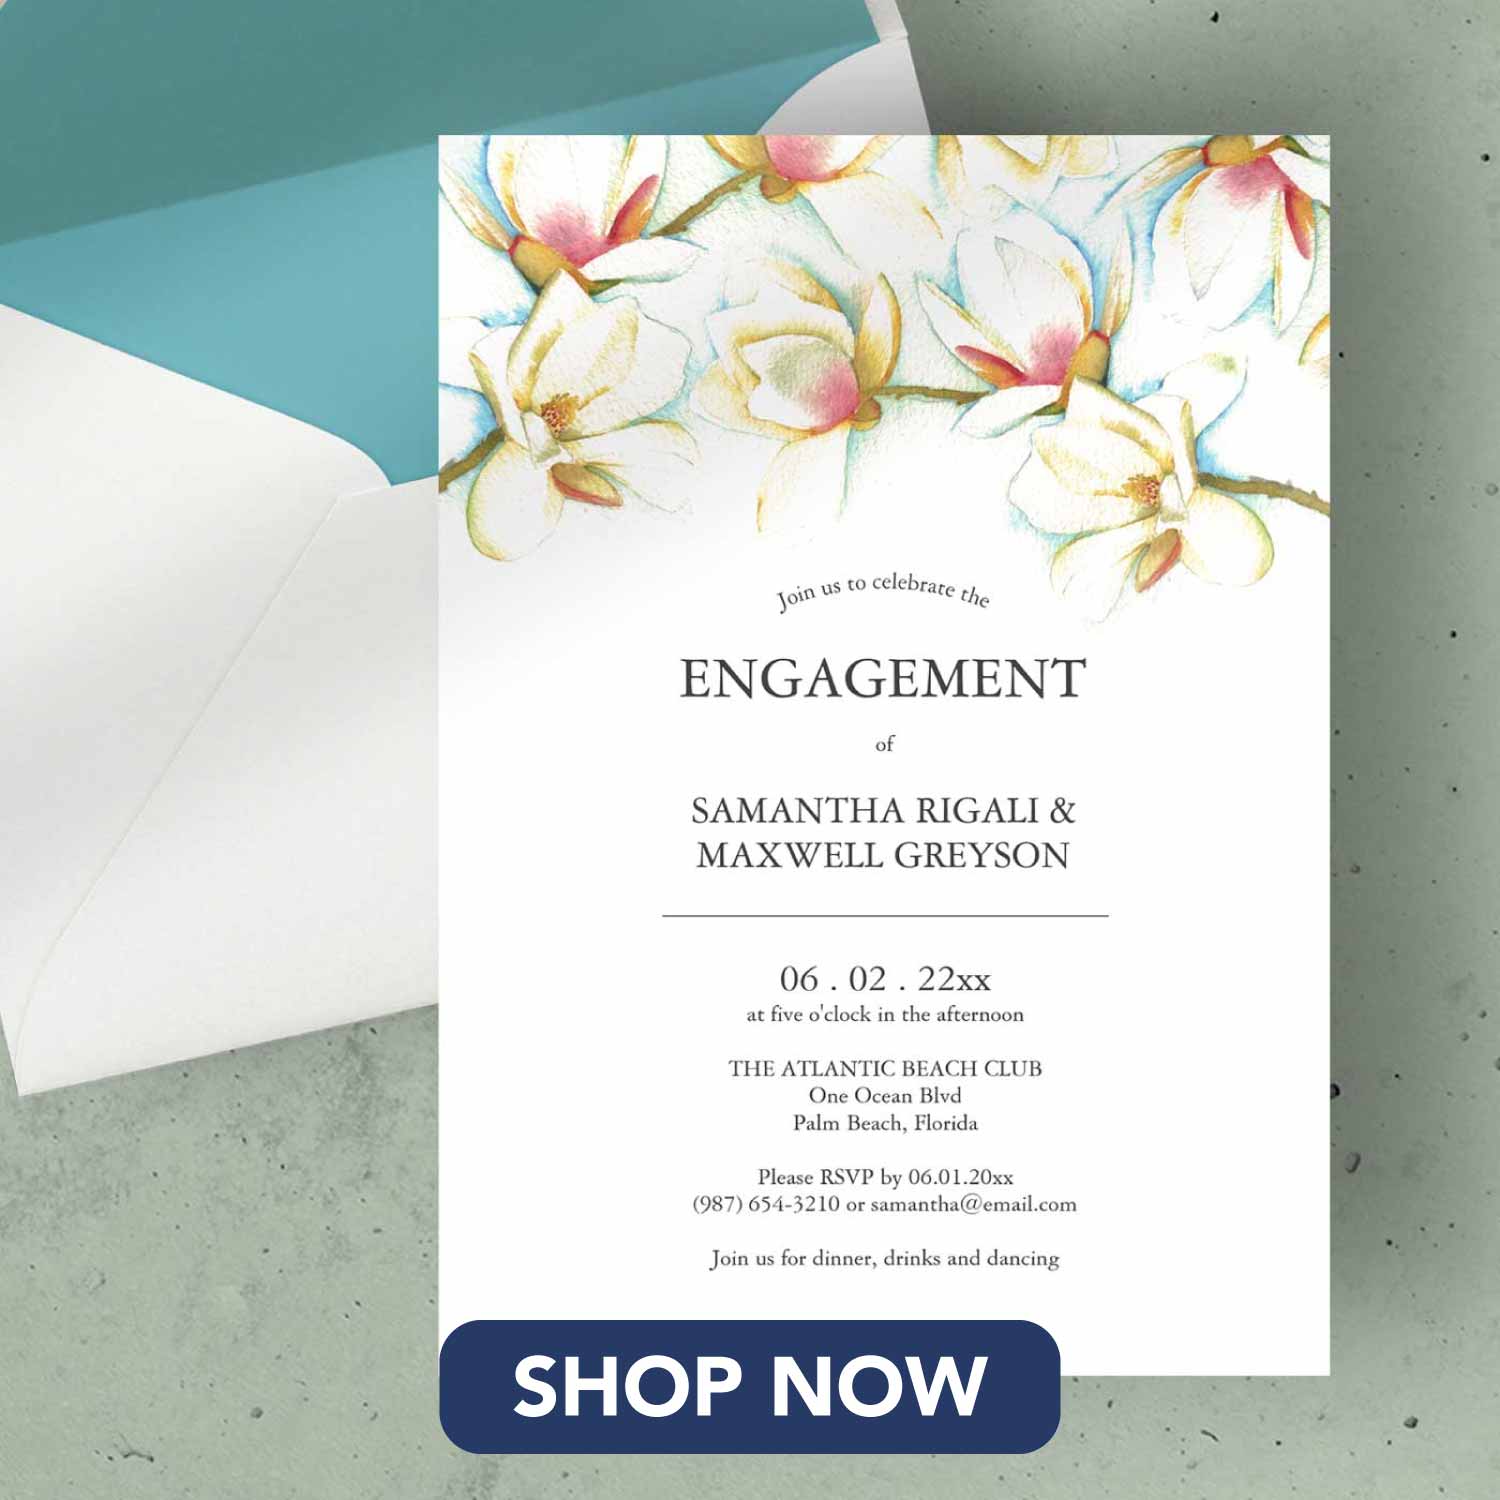 Floral engagement party invitations feature white magnolia flower watercolor art by Victoria Grigaliunas of Do Tell A Belle